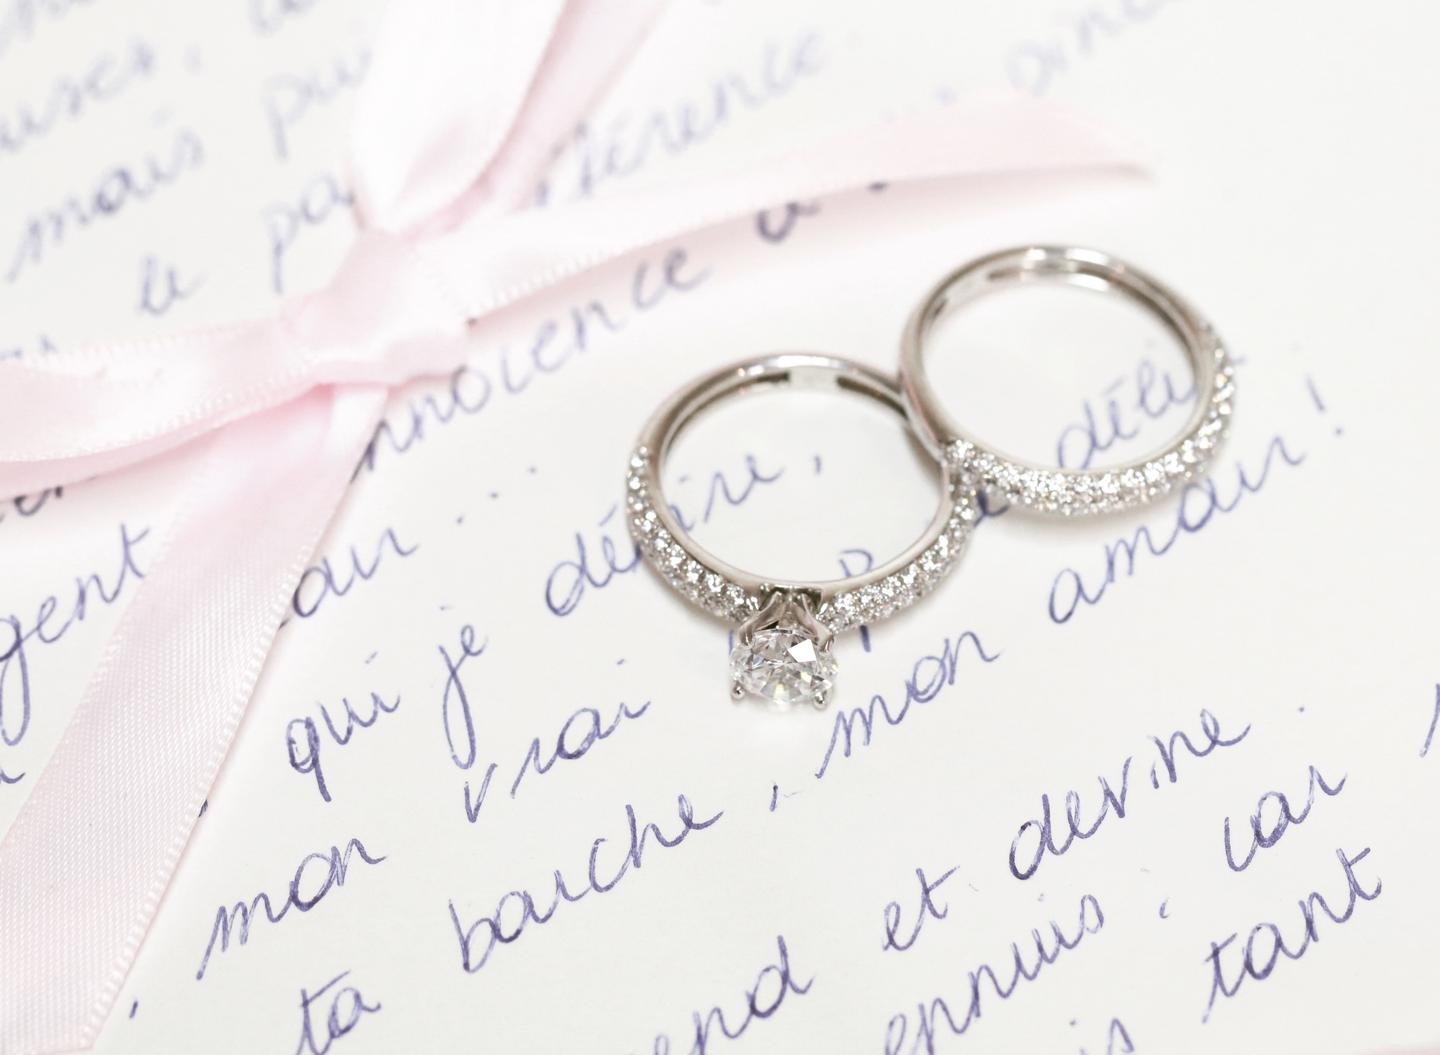 The history of wedding rings and their significance today